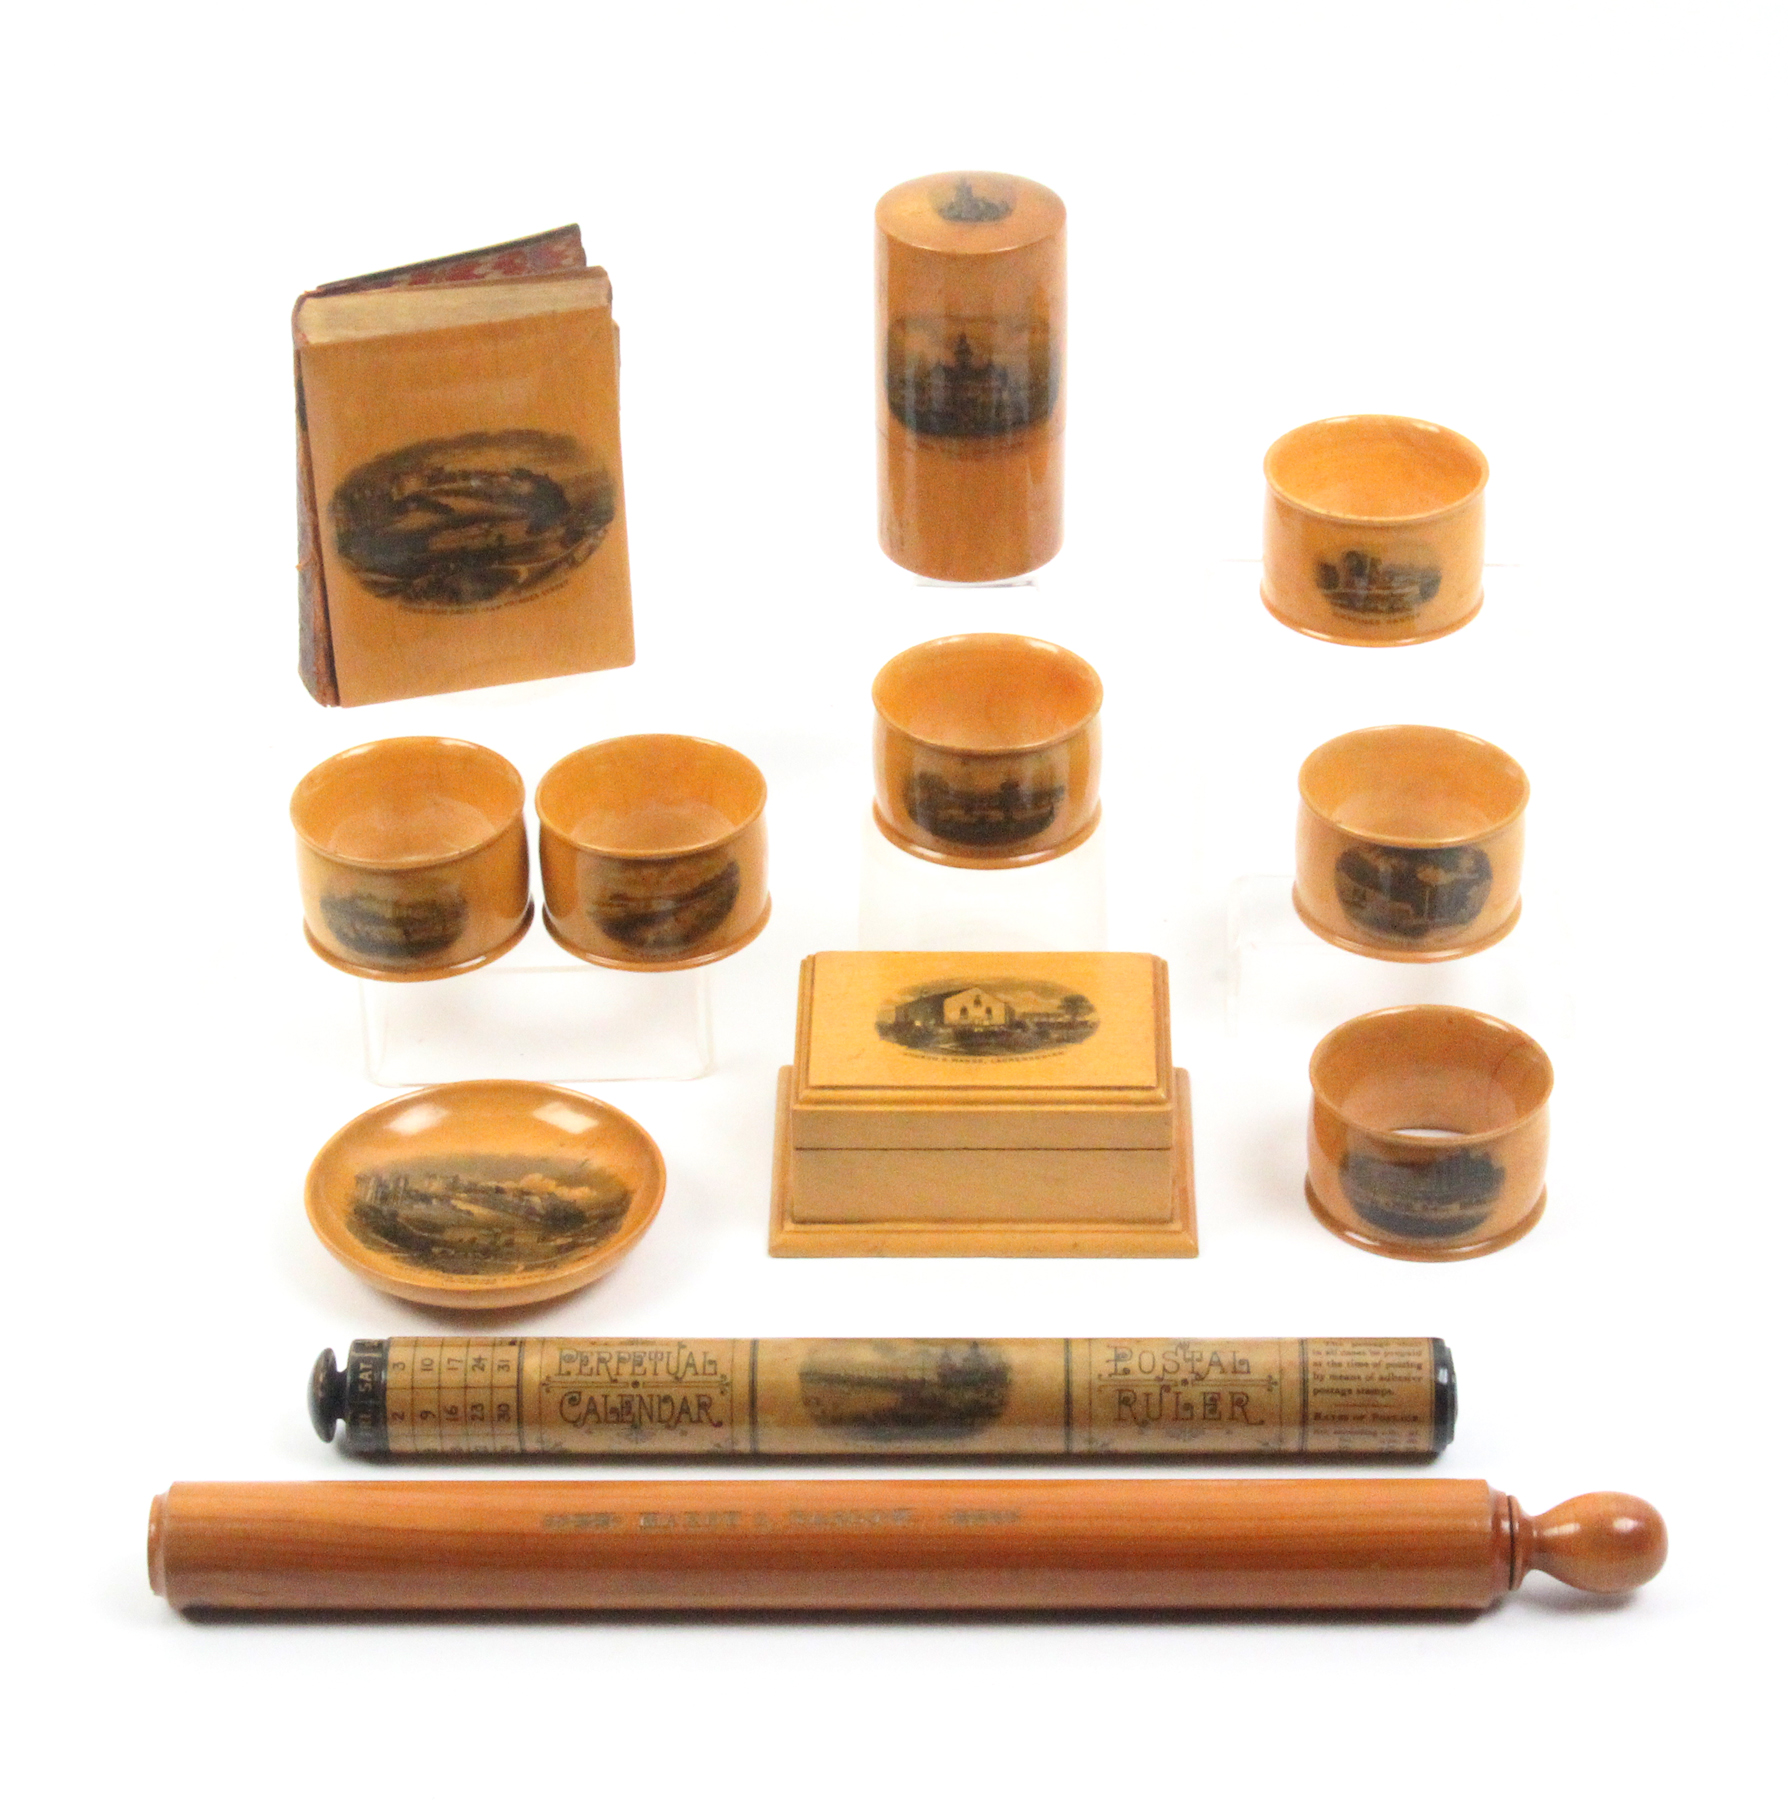 Mauchline ware - twelve pieces comprising a set of six numbered napkin rings (Pier Hastings/The